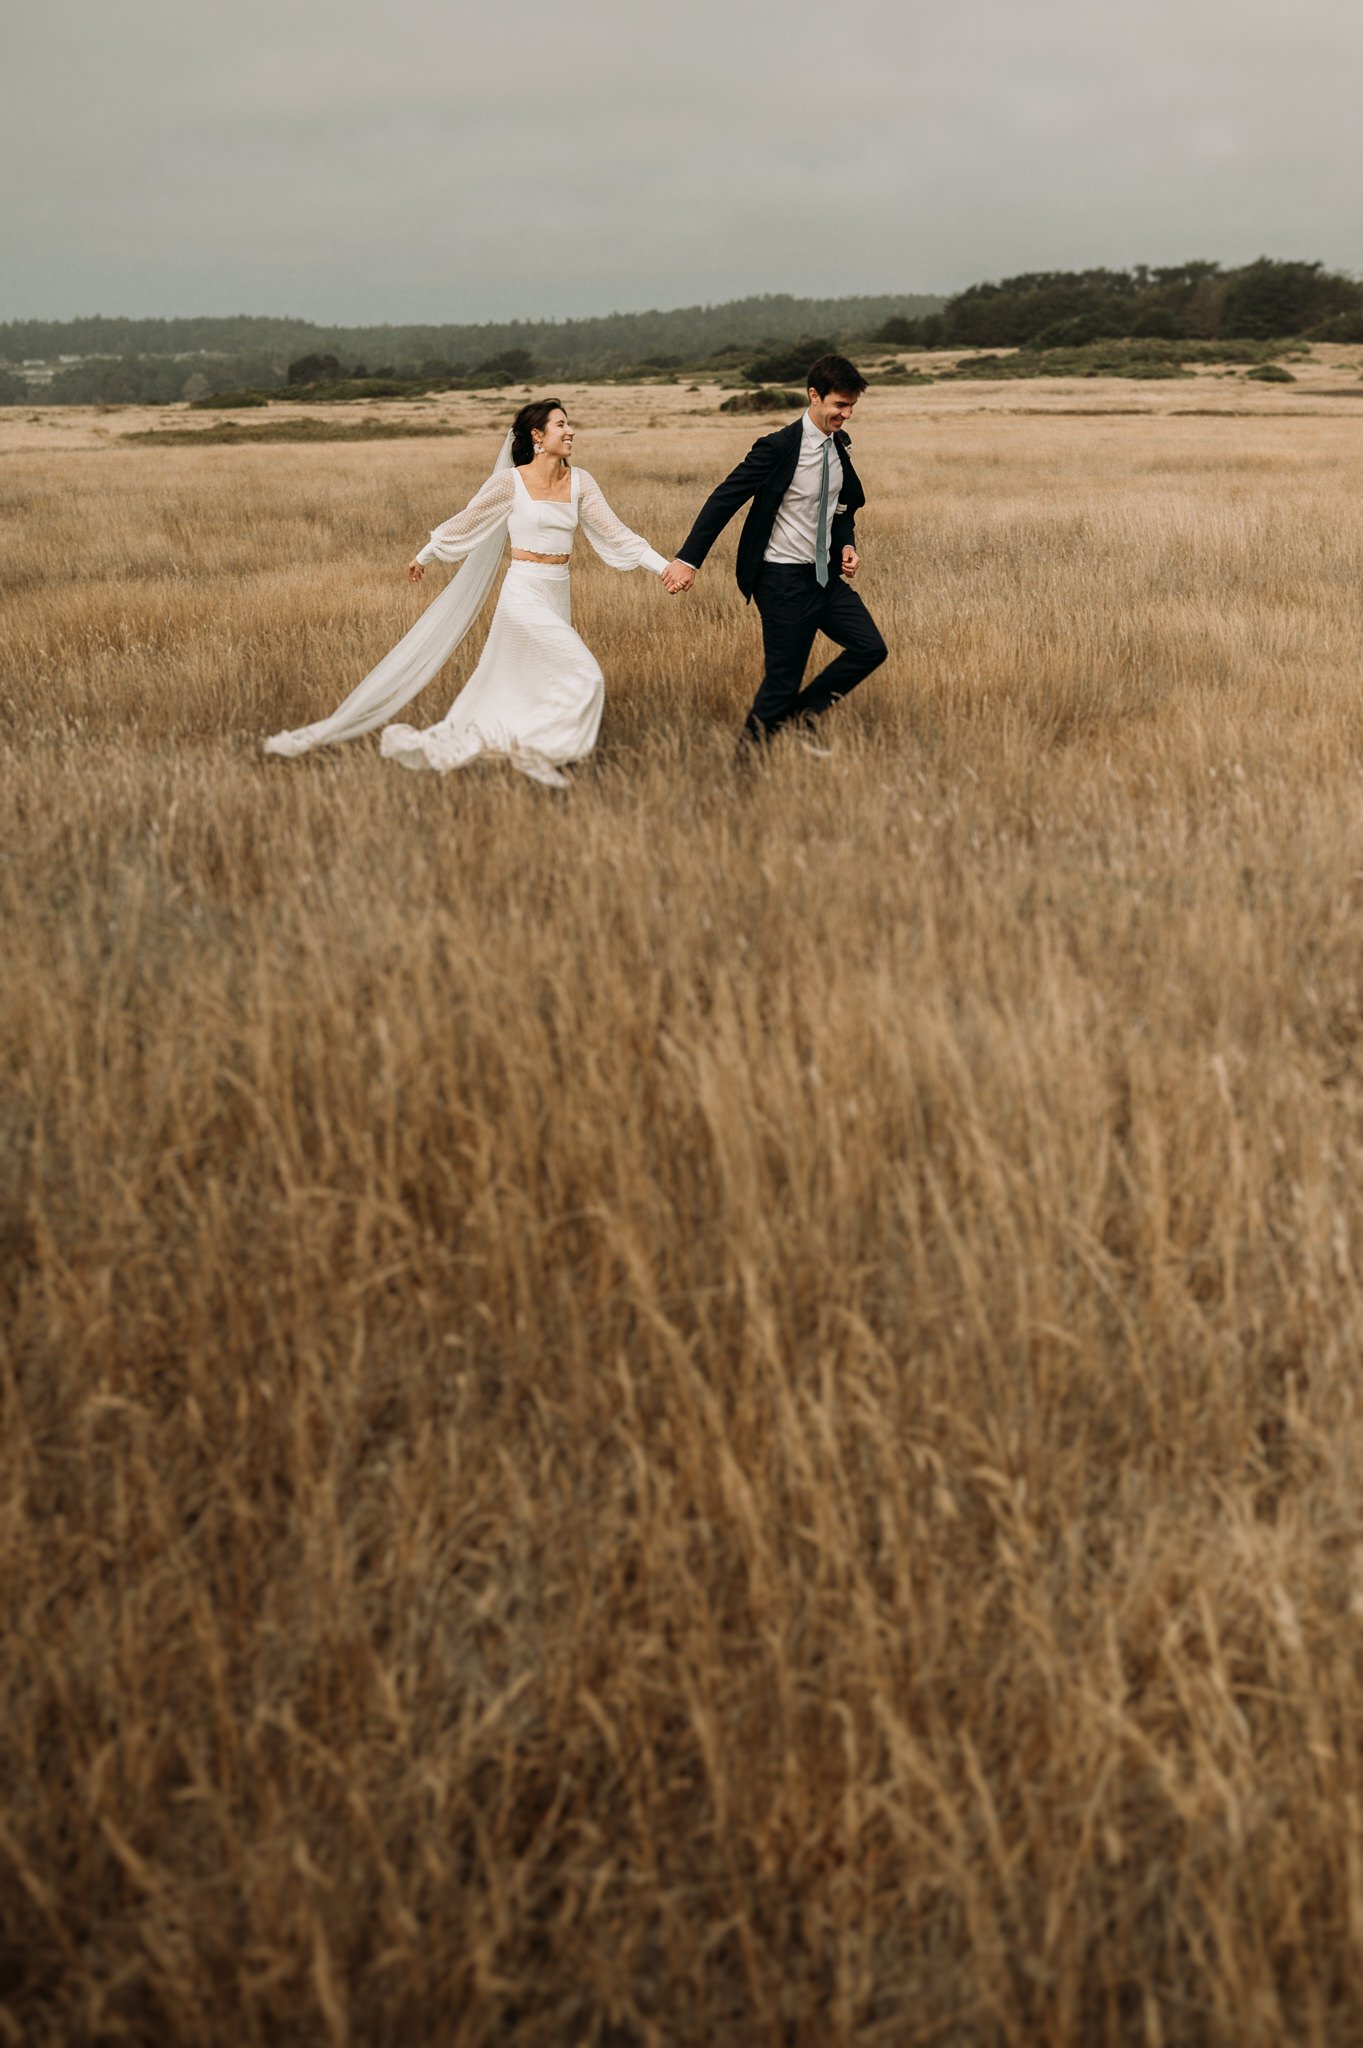 Bride and groom in wedding attire running through grassy field hand and hand on the Mendocino coast.